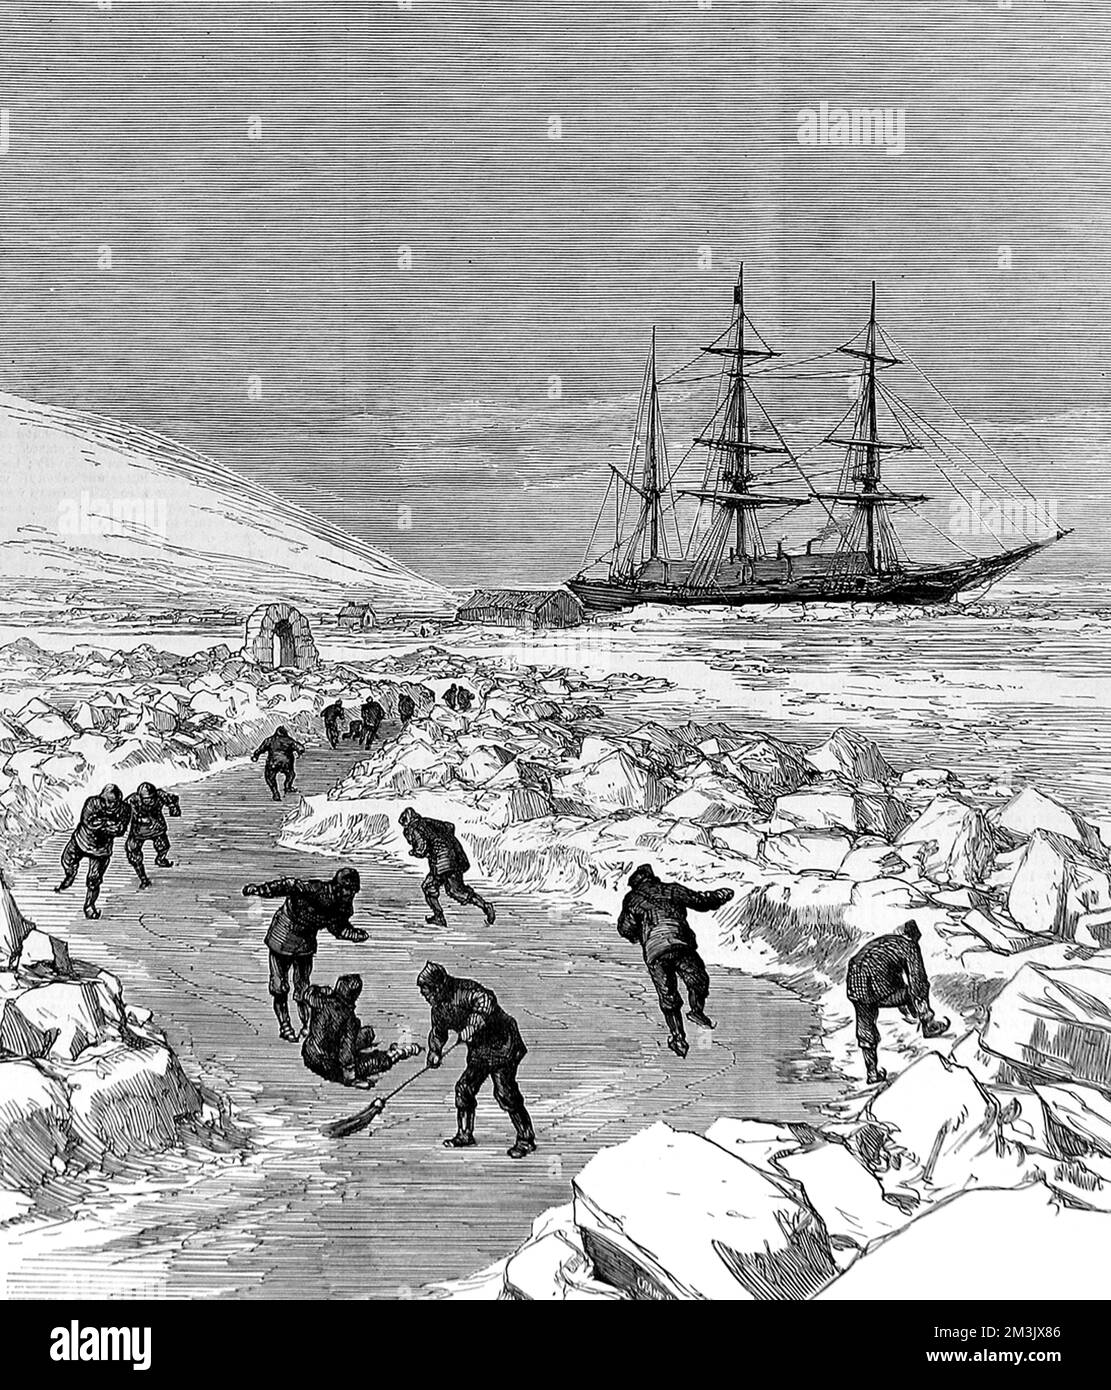 The skating rink that was created beside the winter quarters of HMS 'Discovery' during the British Arctic Expedition of 1875-1876.  In the summer of 1875 the British Admiralty sent Captain George Nares with two ships, HMS 'Alert' and HMS 'Discovery', to make an attempt to reach the North Pole via Smith Sound.   Although the attempt was unsuccessful, a new 'furthest North' record was set, the coasts of Greenland and Ellesmere Island were charted and much scientific data gathered. Stock Photo